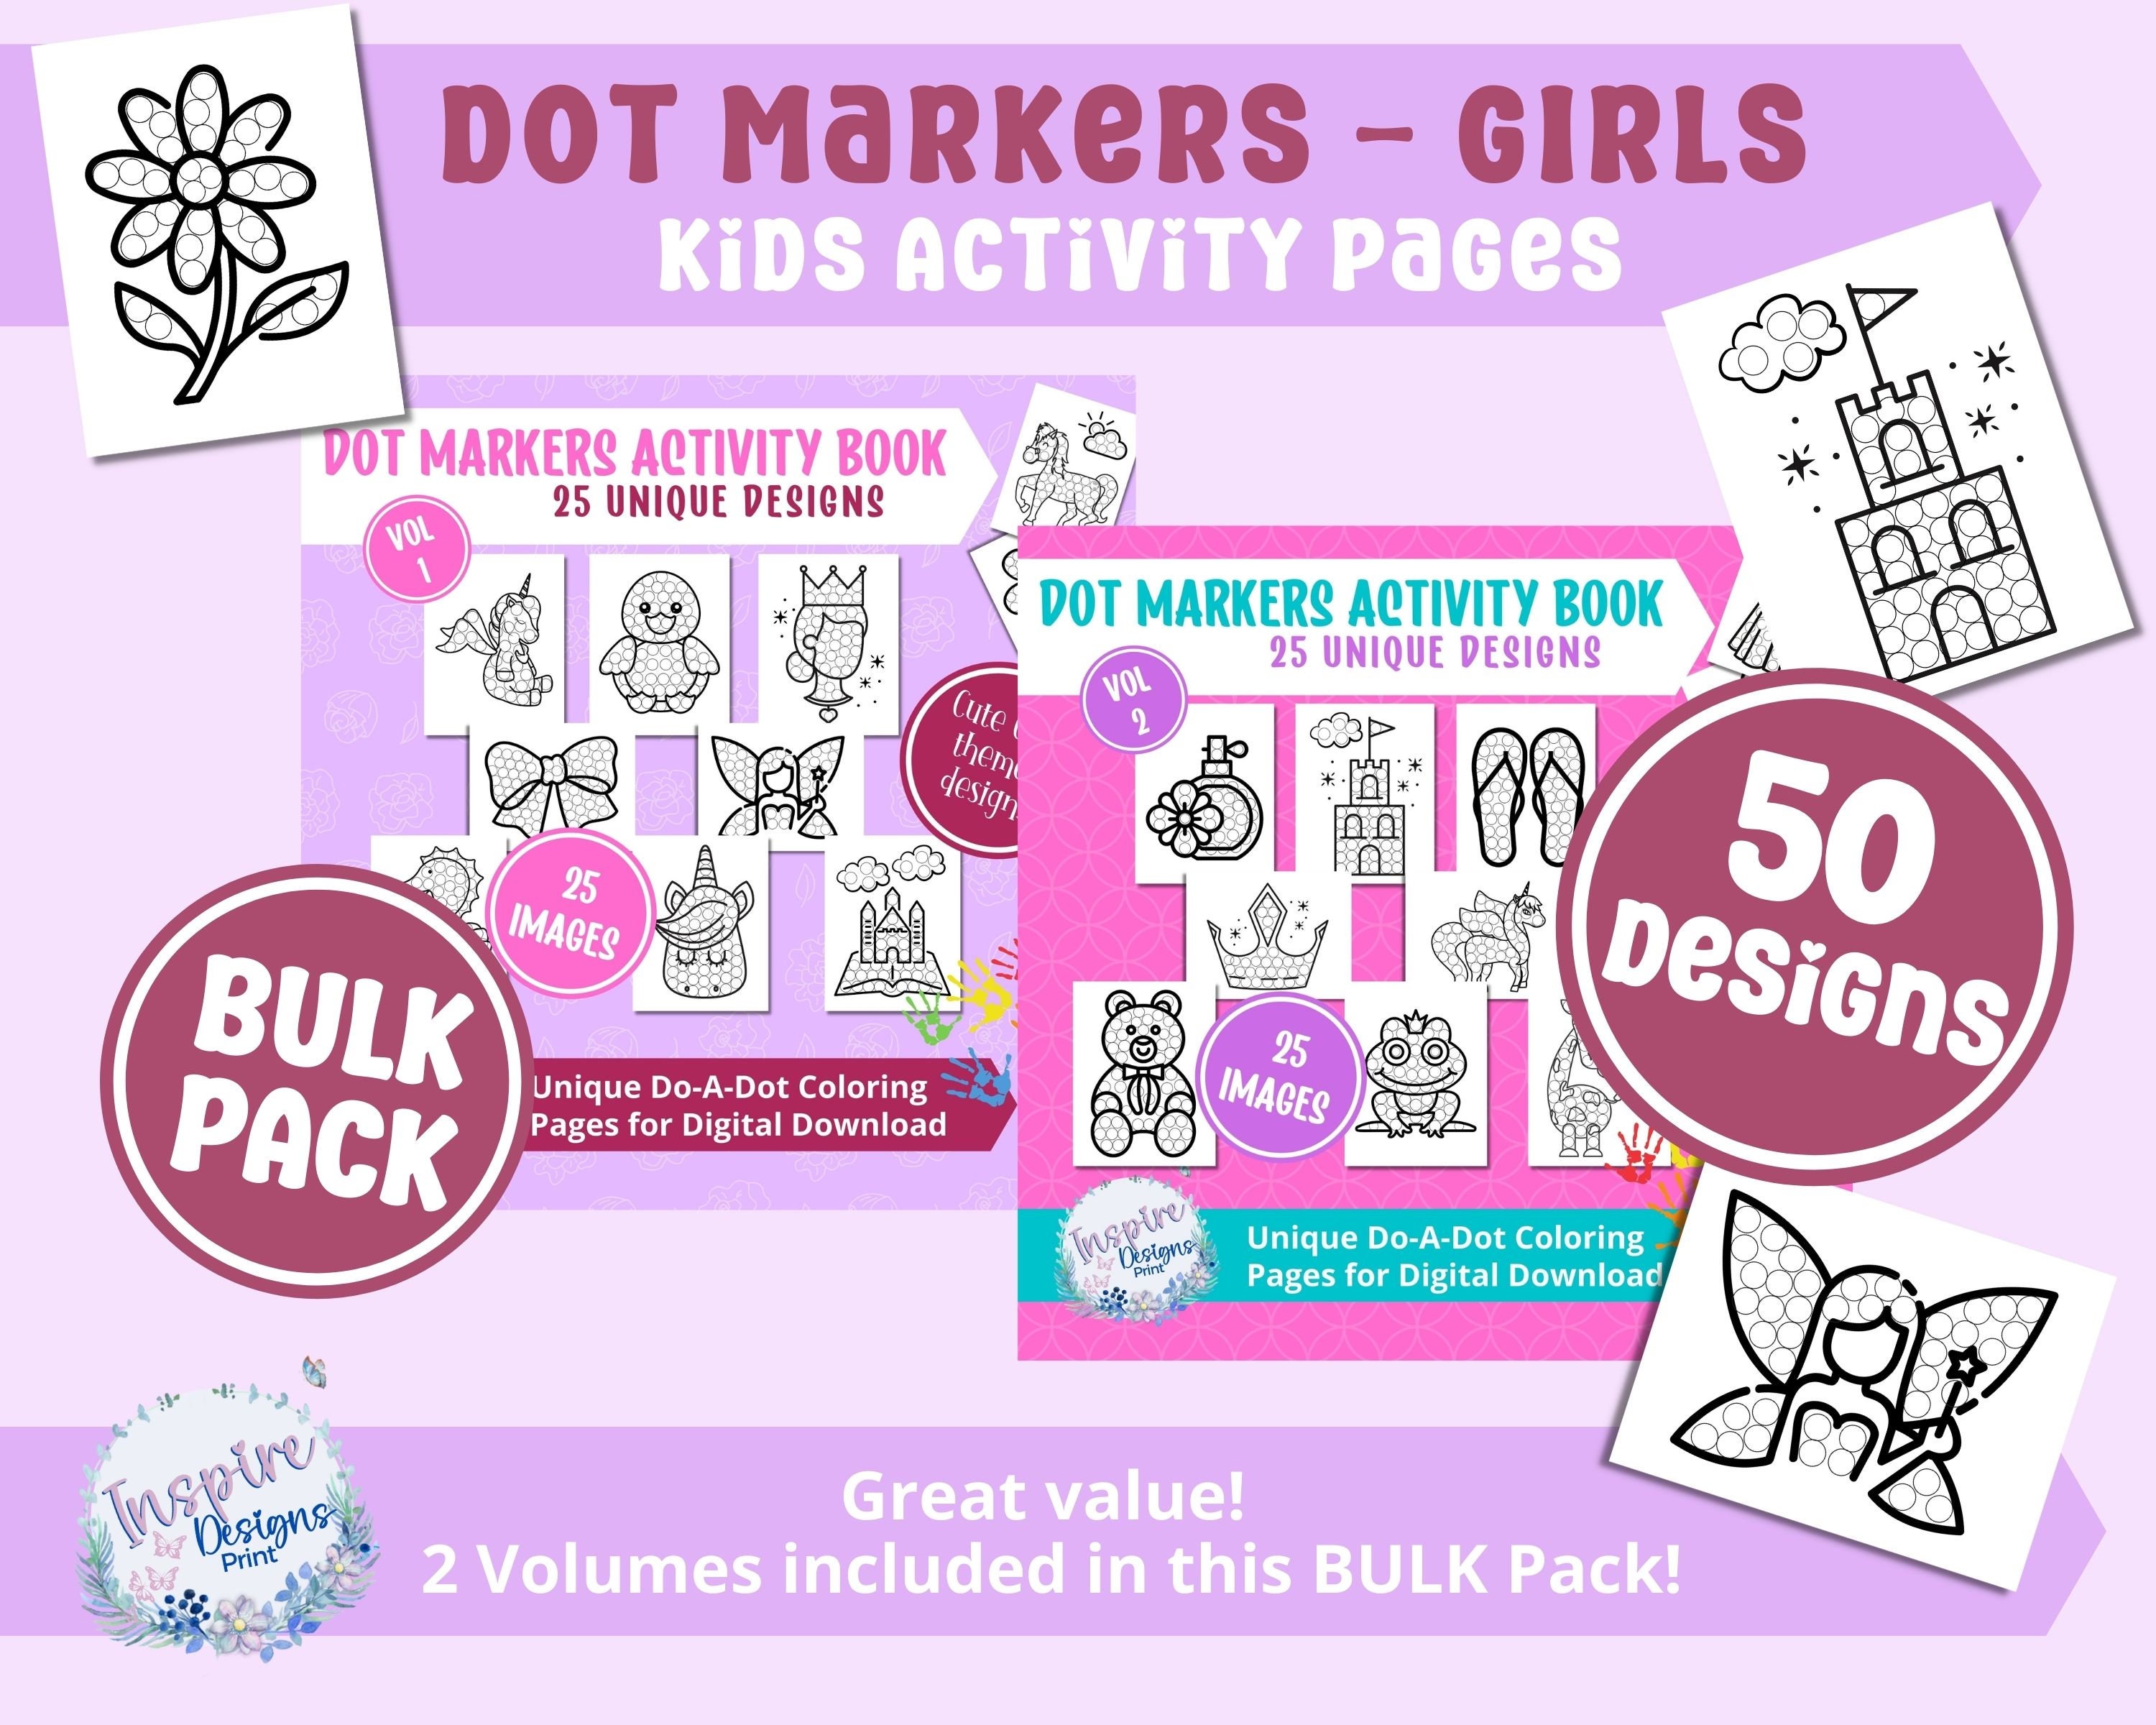 Buy BULK PACK 50x Cute GIRLS Themed Dot Marker Coloring Pages Vol1